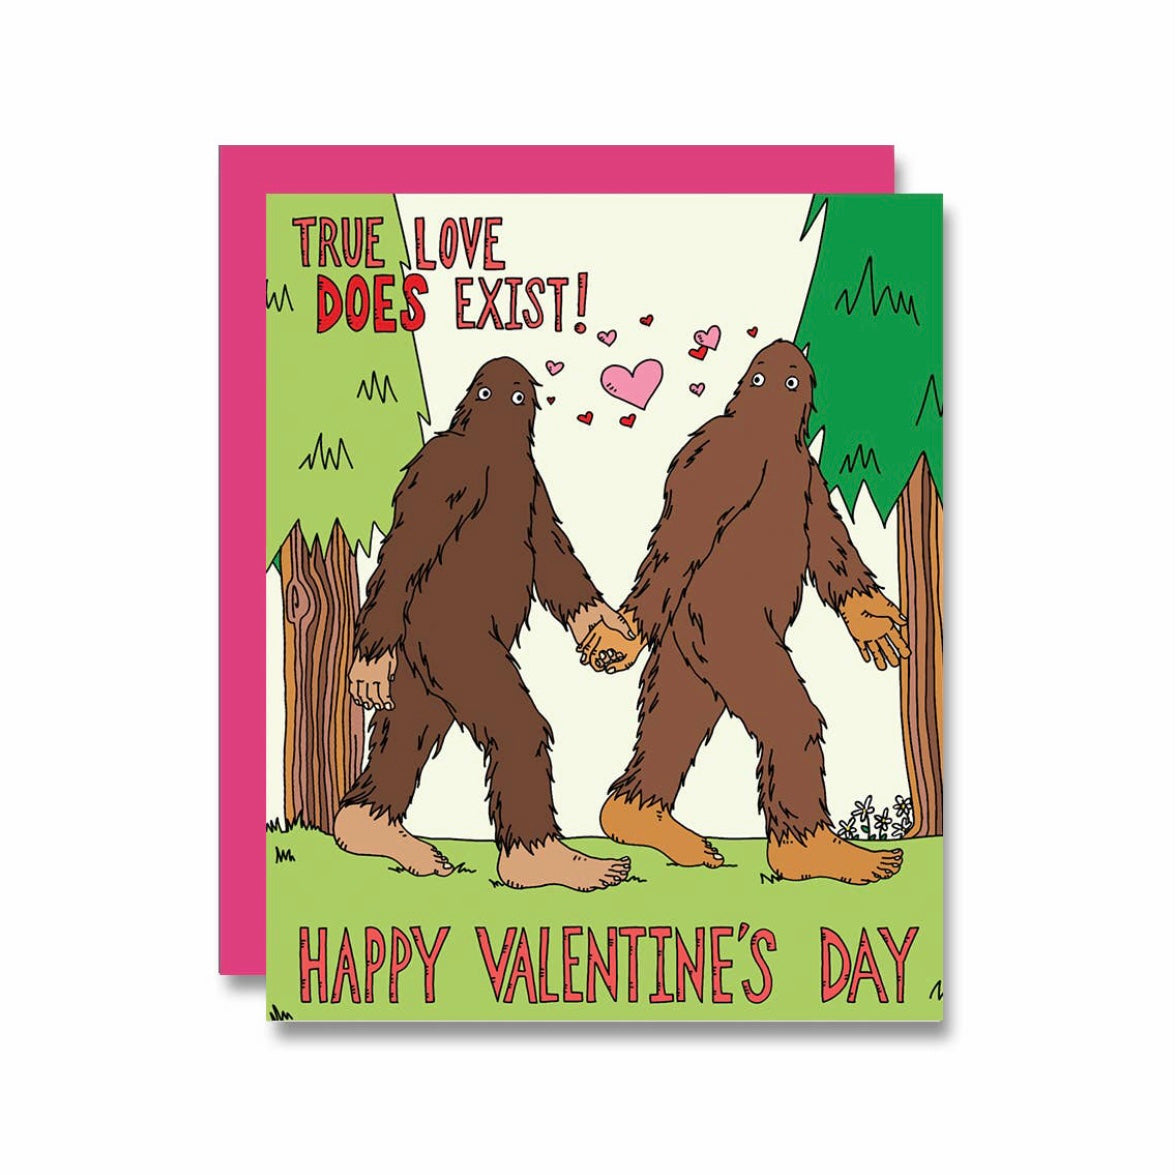 Ture love does exist Valentines greeting card